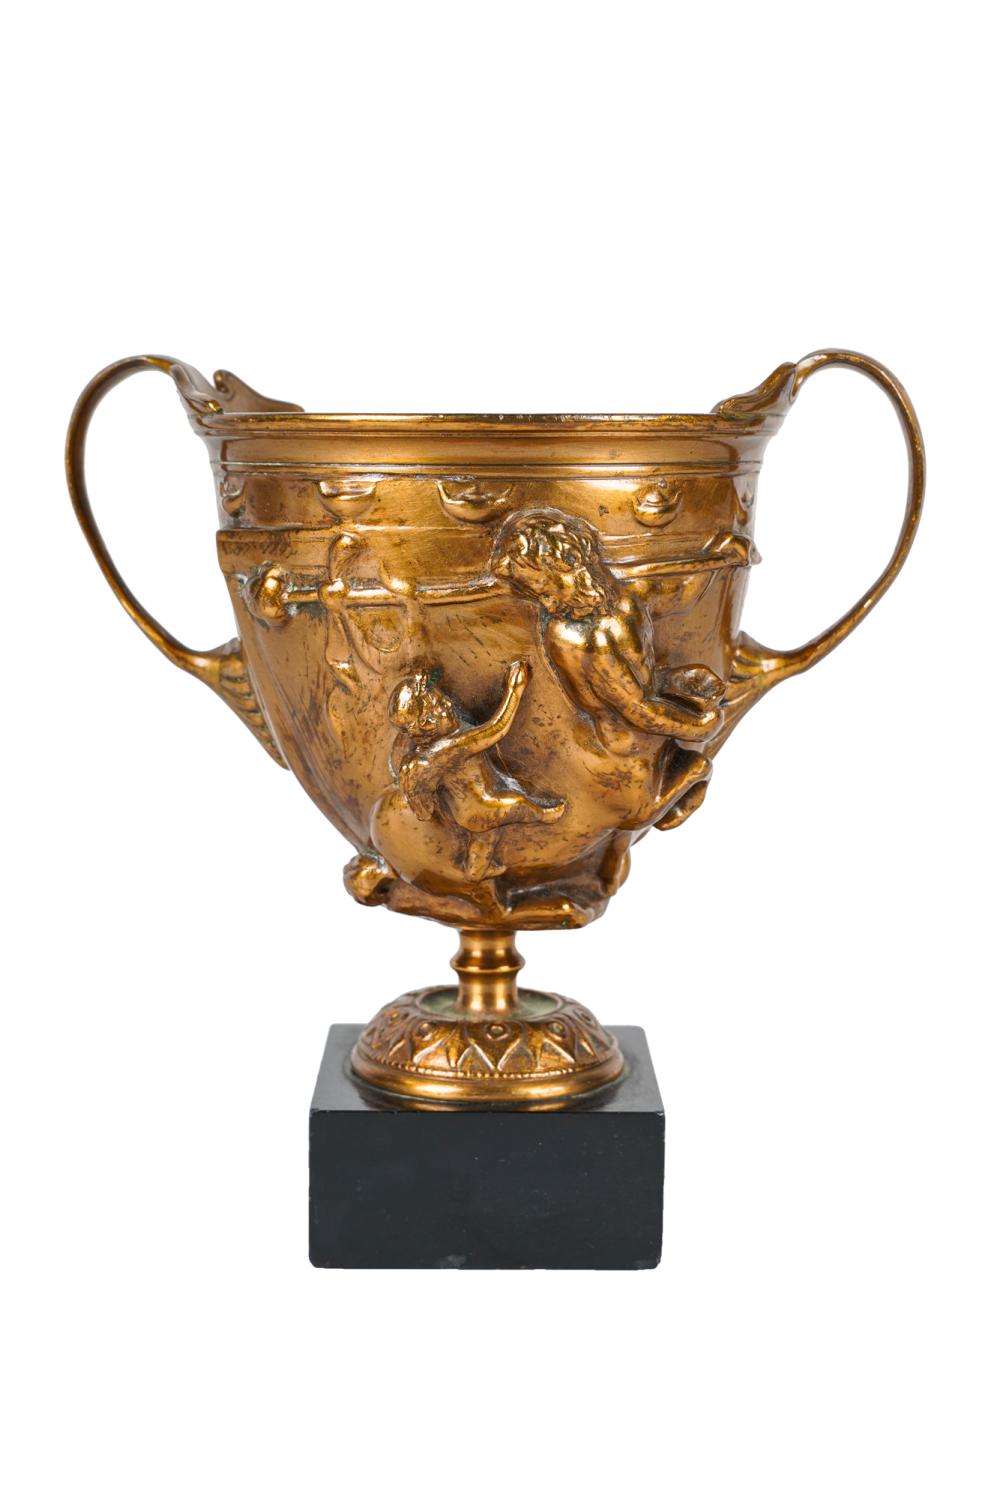 GILT-BRONZE CHALICEdecorated with centaurs